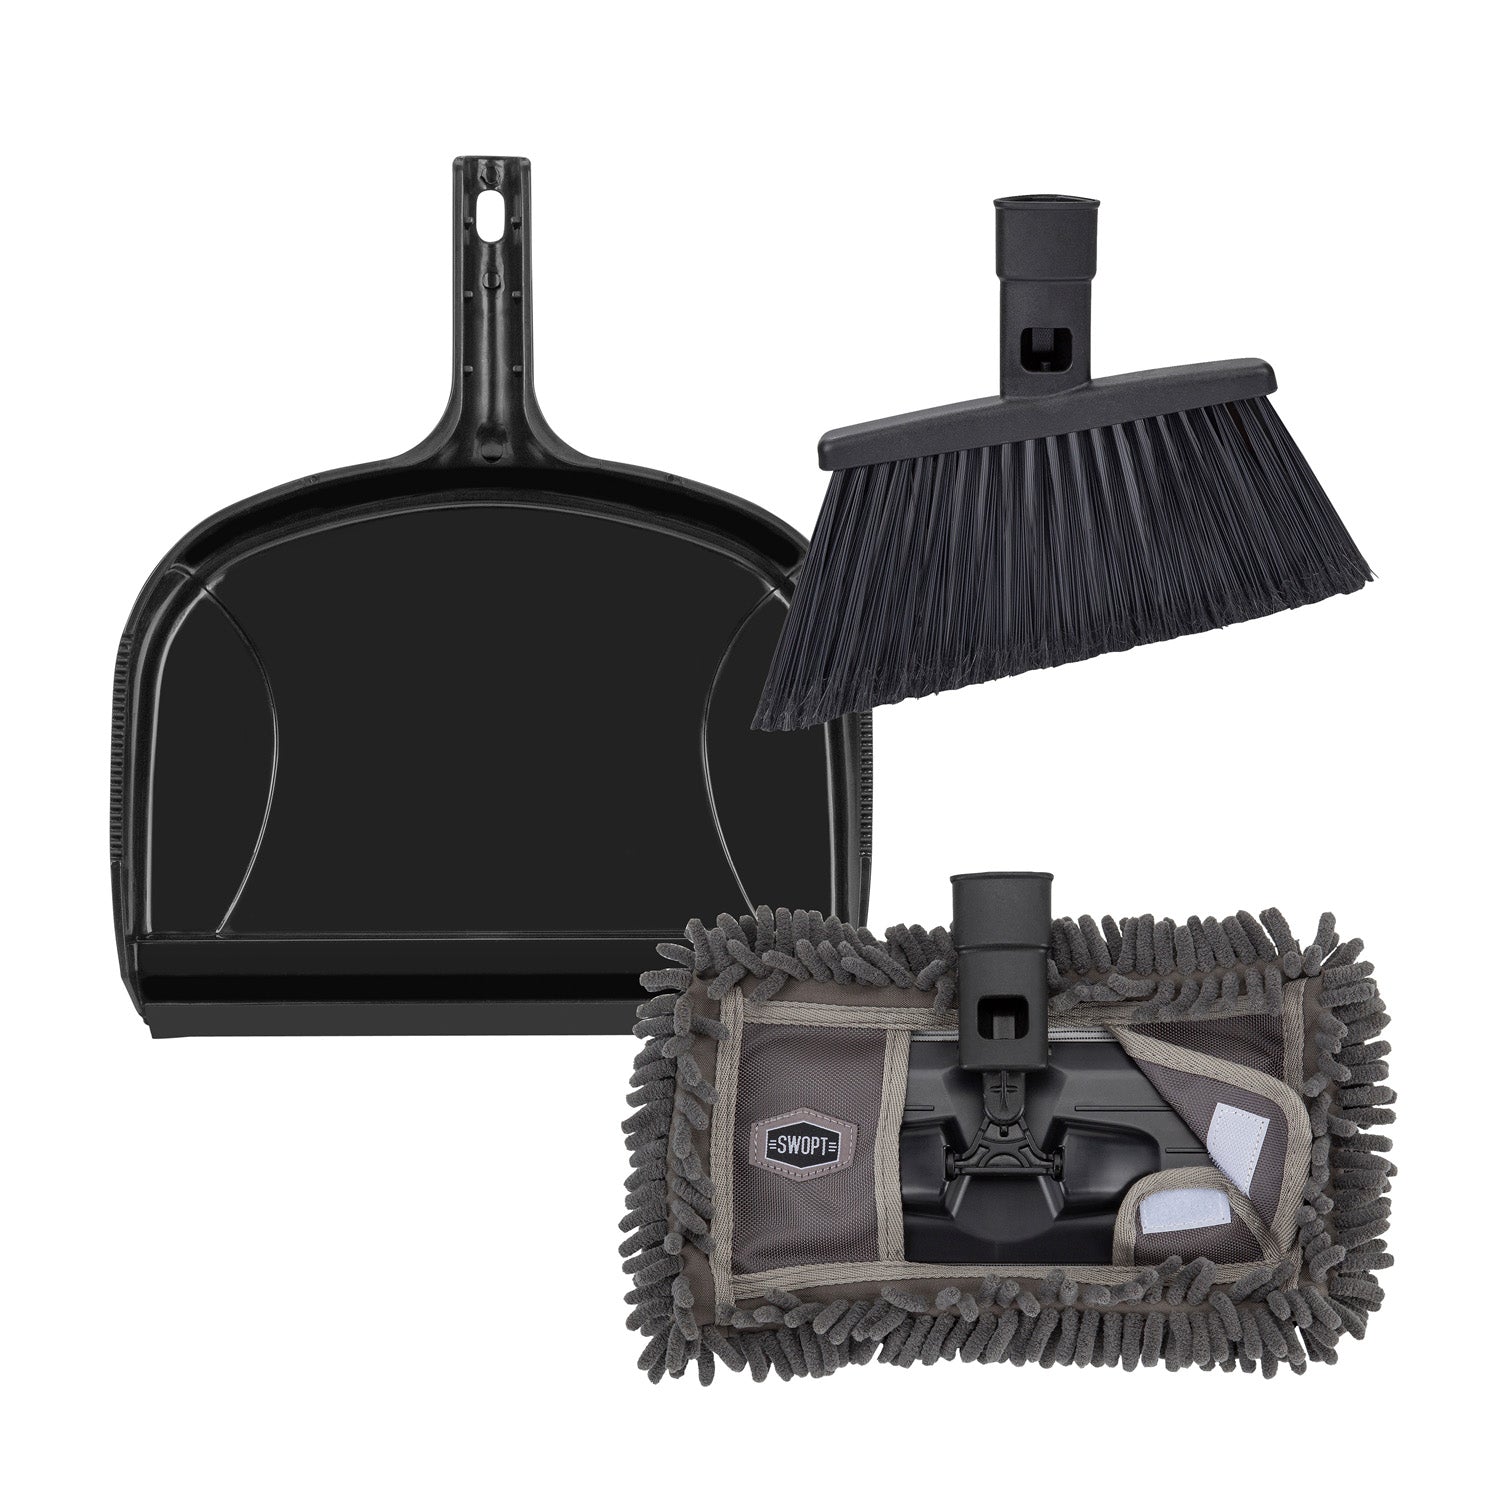 Broom and Dustpan Set / Upright Sweep Set / Dust Pan with Stain